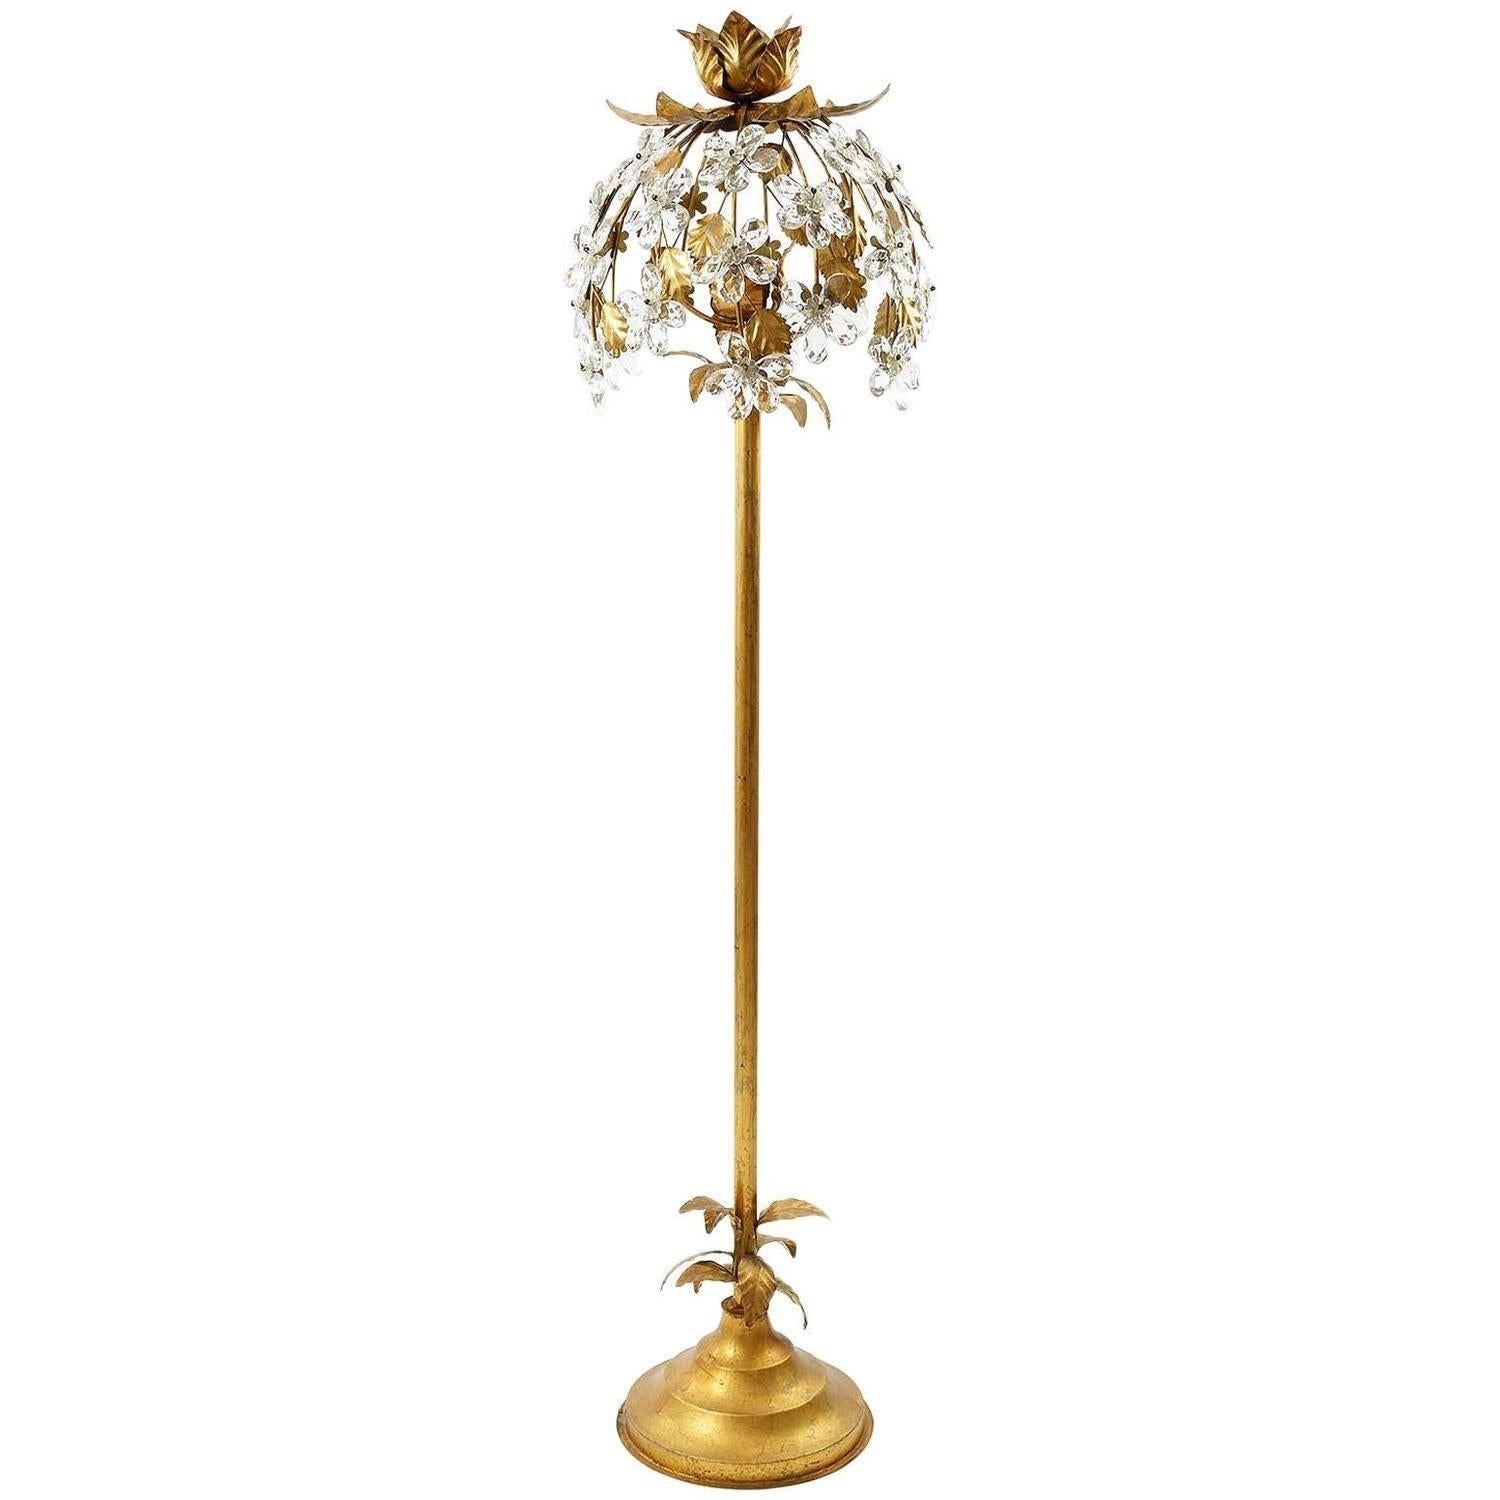 One of two wonderful floral hollywood recengy floor lights, manufactured in Mid-Century in Italy between 1960 and 1970. They are made of crystal glass and metal in an antique gilt or bronzed finish. Each light takes one standard screw base bulb.